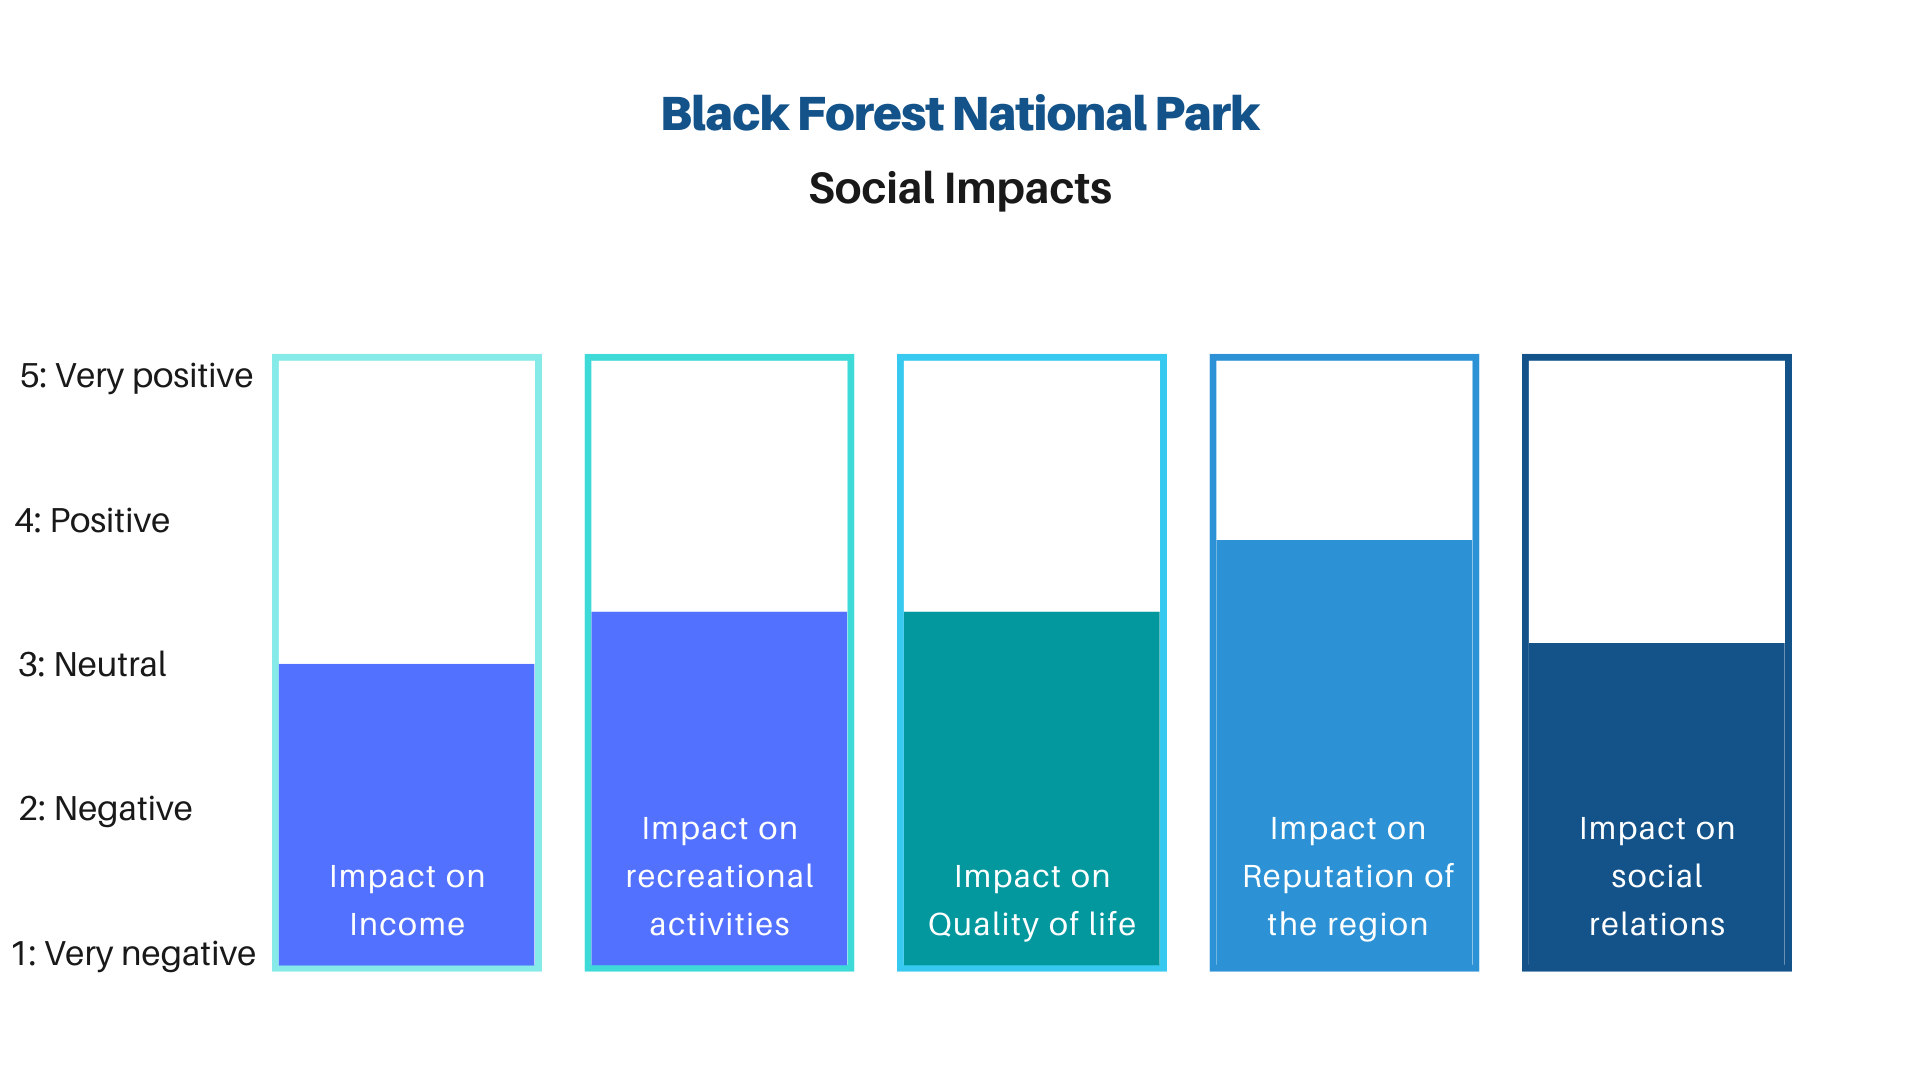 Social impacts of Black Forest National Park